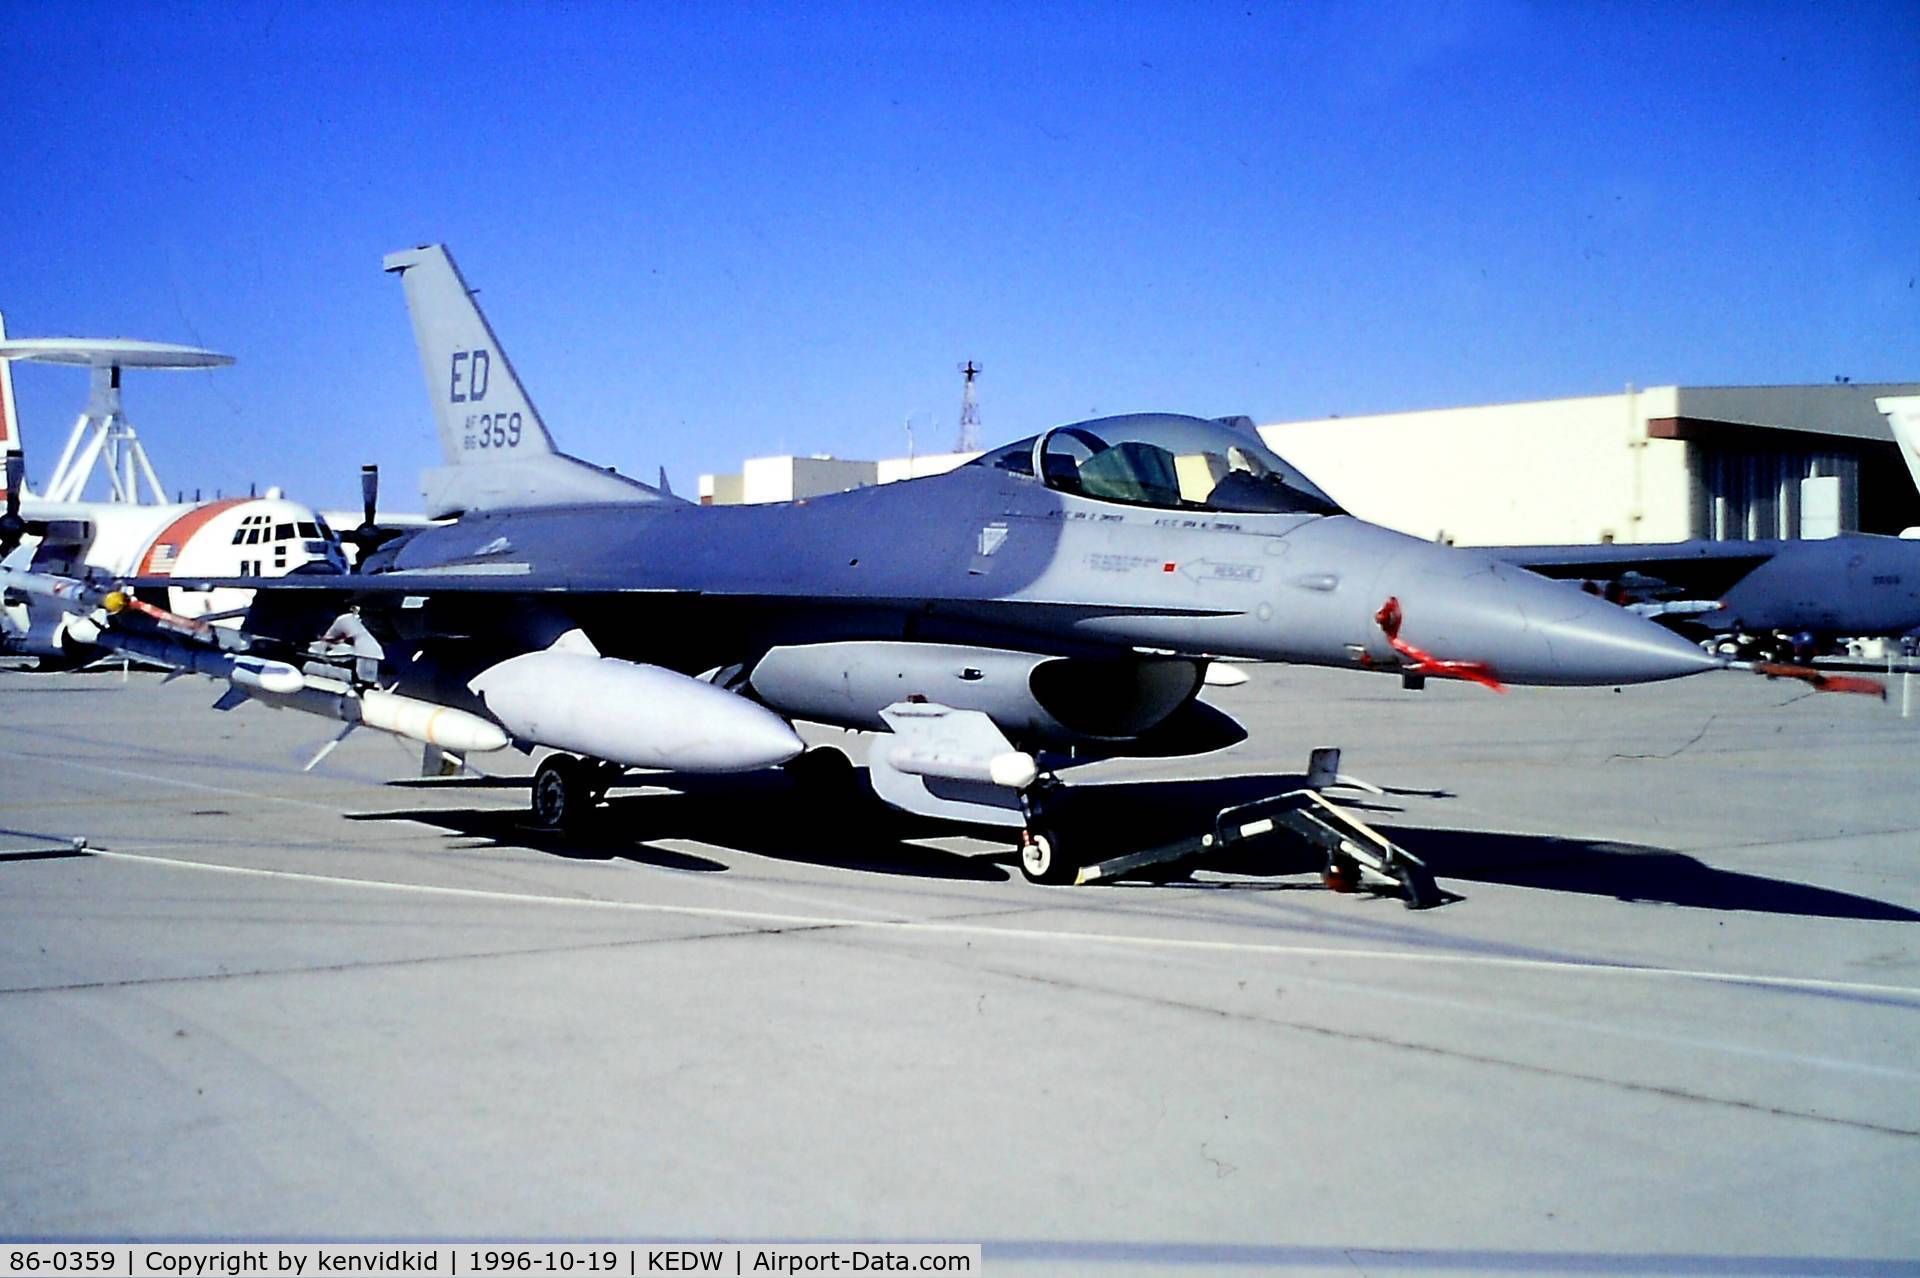 86-0359, 1986 General Dynamics F-16C Fighting Falcon C/N 5C-465, At the 1996 Edwards Open House.